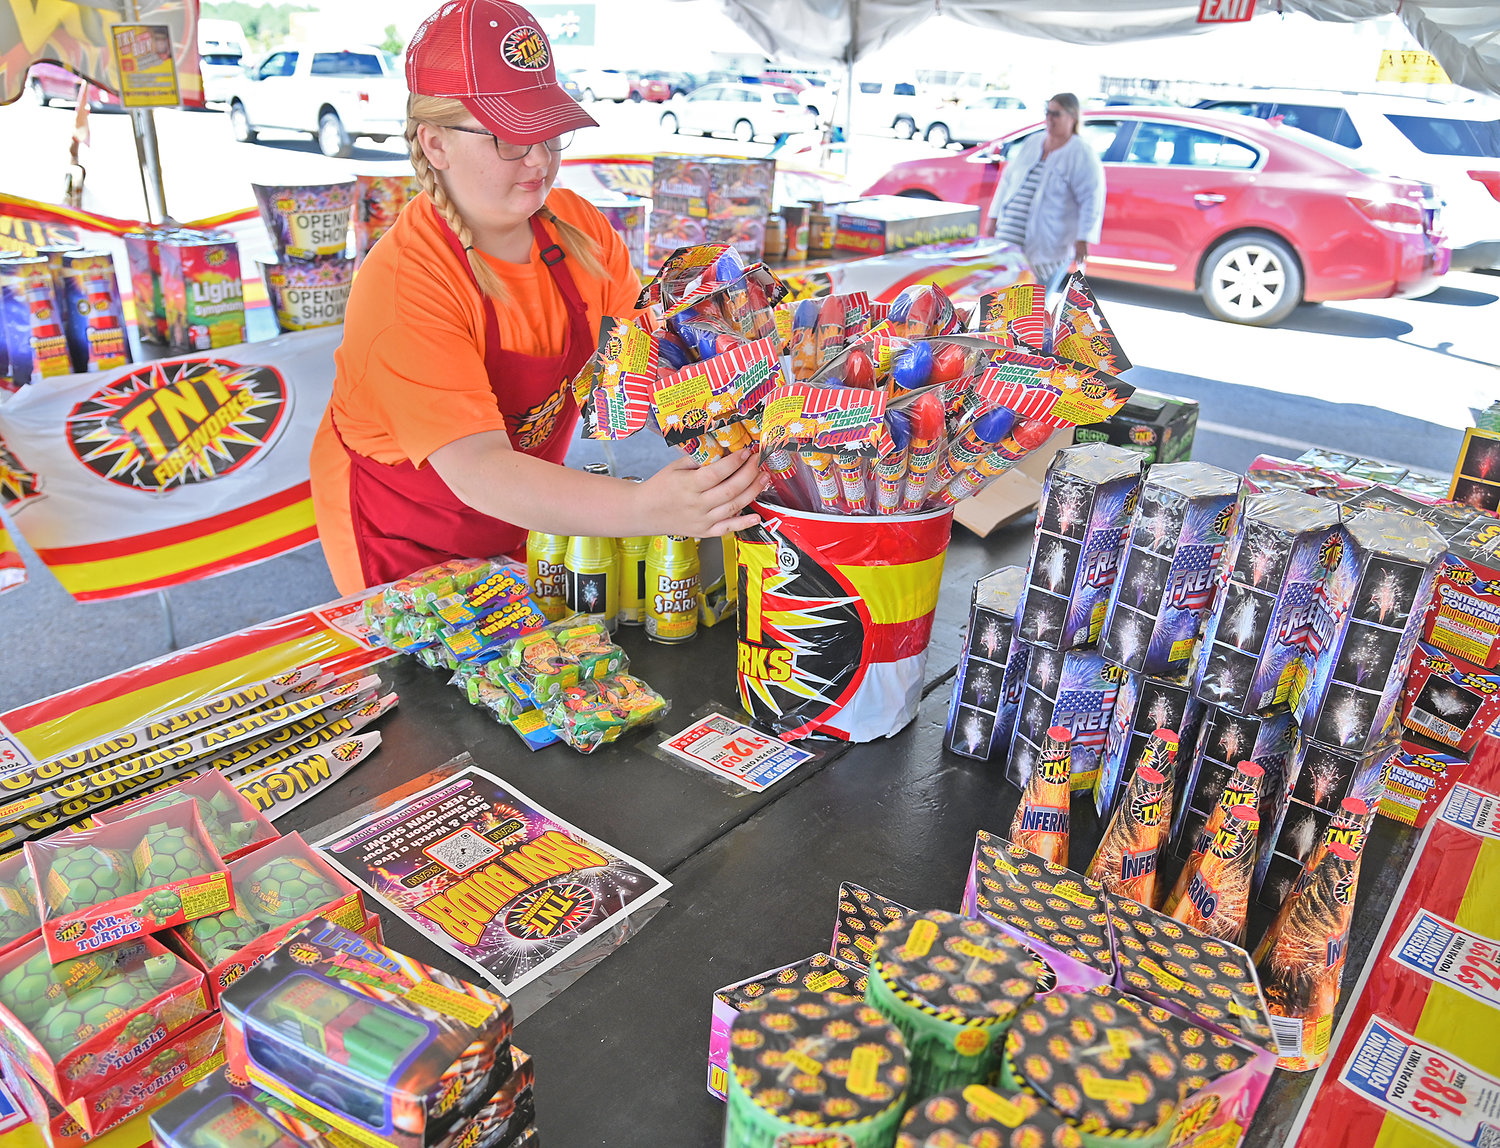 Brooke Wright, age 13, daughter of Jason and Denise Wright, organizes the jumbo rocket fountain fireworks at the TNT Fireworks tent at Walmart in Rome this week.